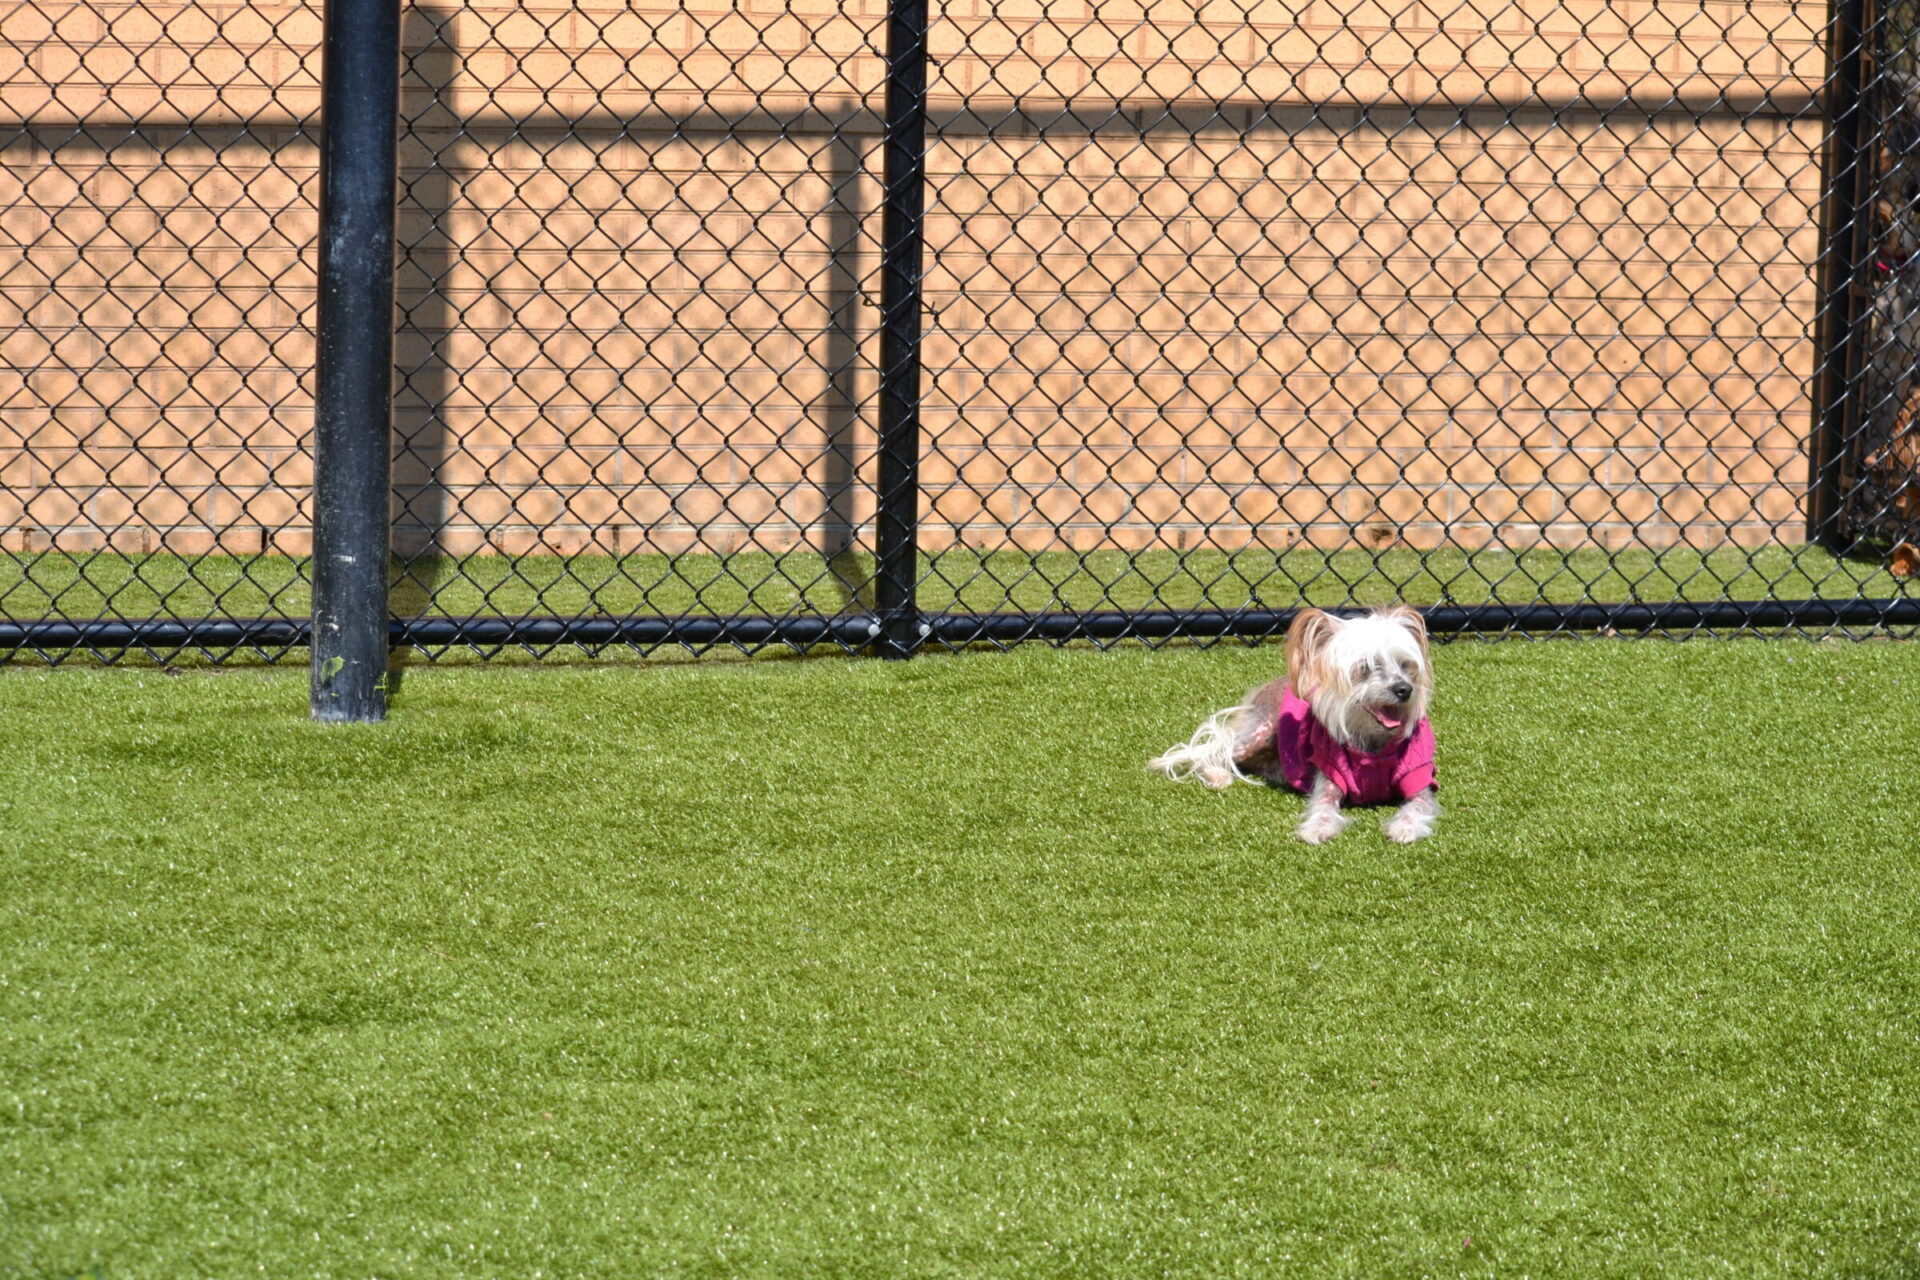 A small, white dog wearing a pink shirt rests on green artificial grass beside a black and brown chain-link fence, with no people visible.